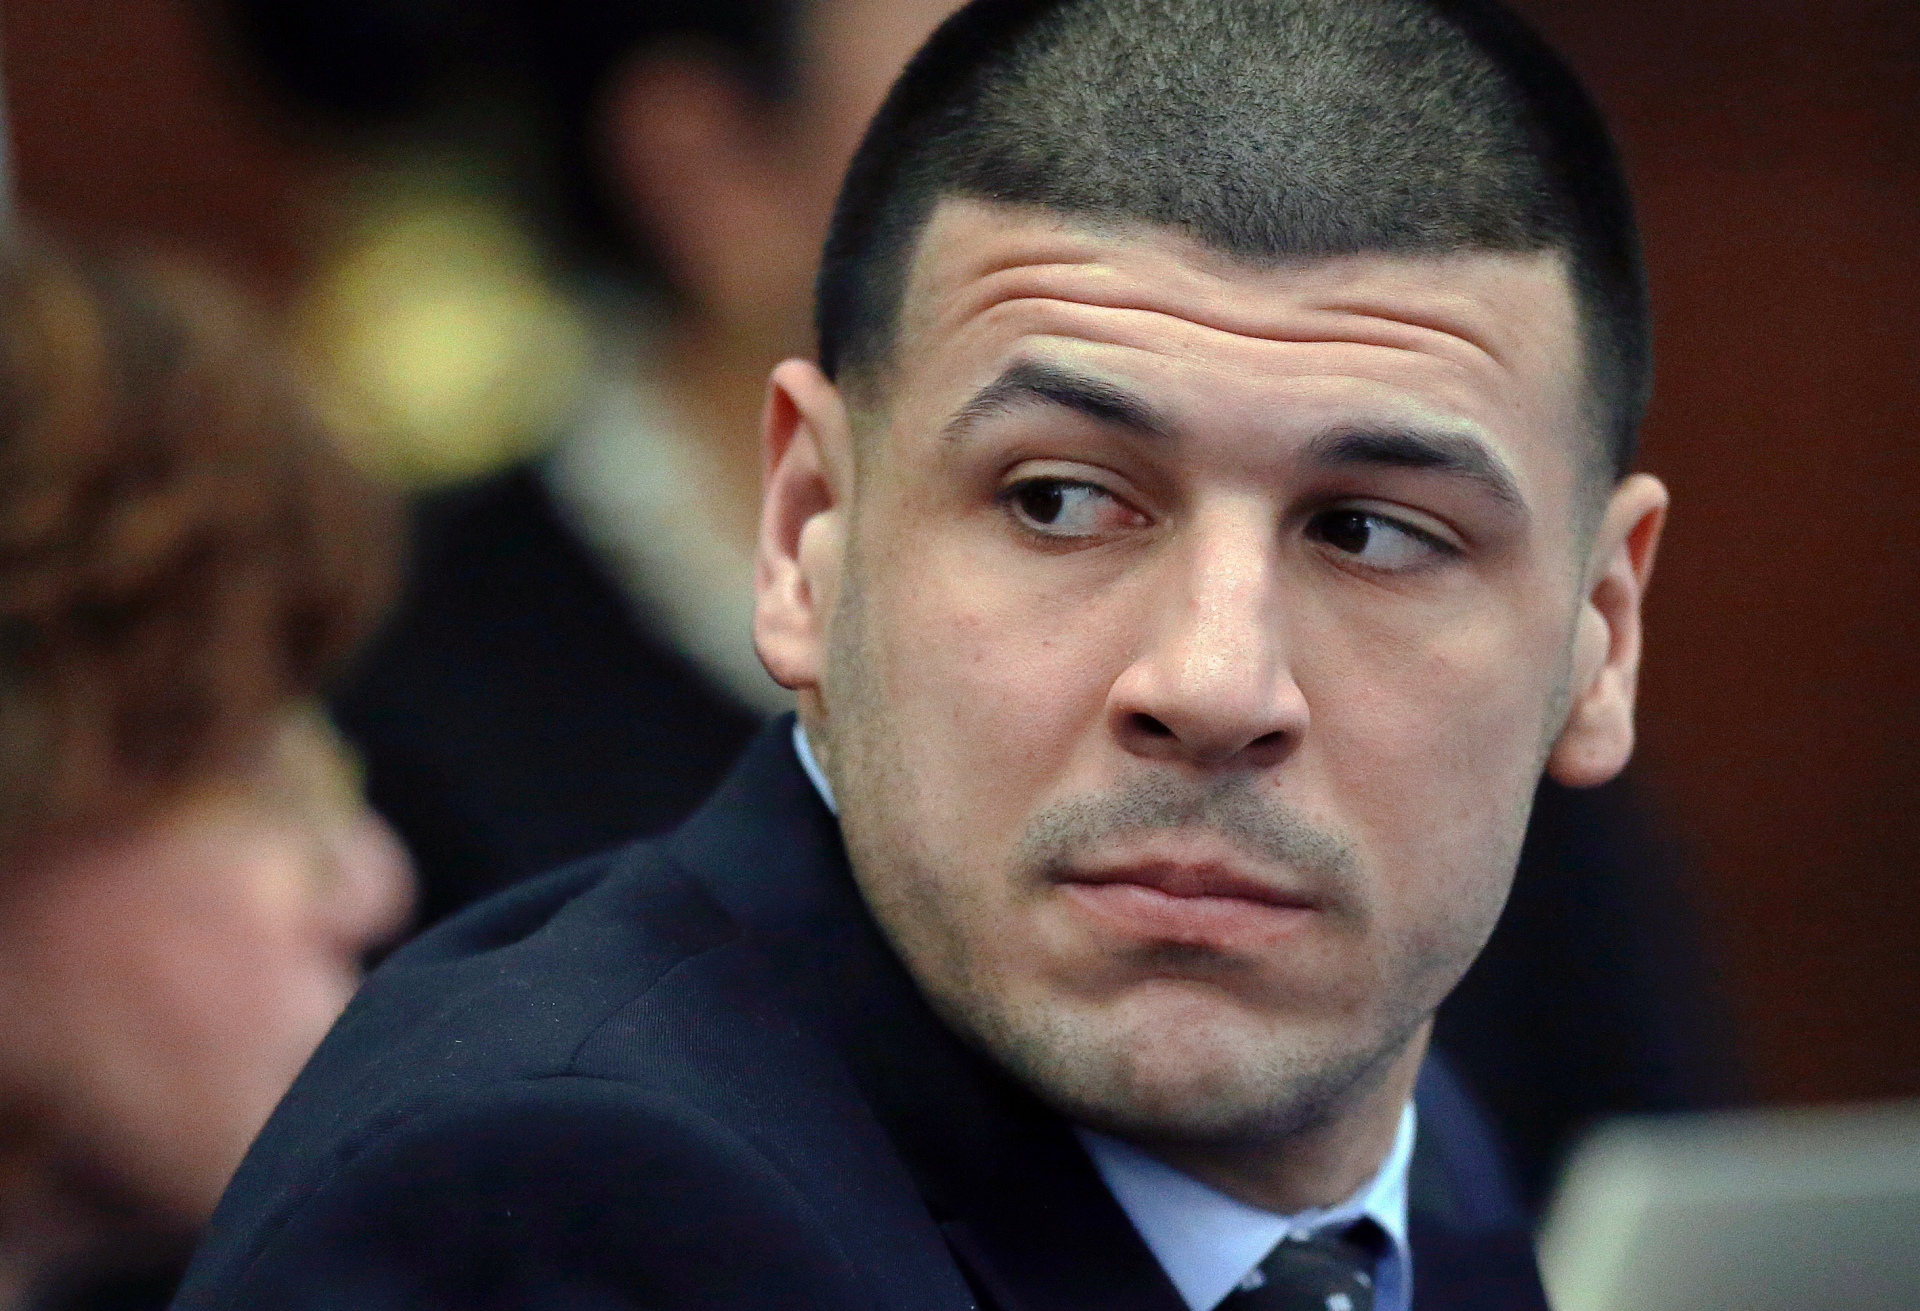 Aaron Hernandez documentary from Netflix releases first teaser trailer about the late NFL player - www.foxnews.com